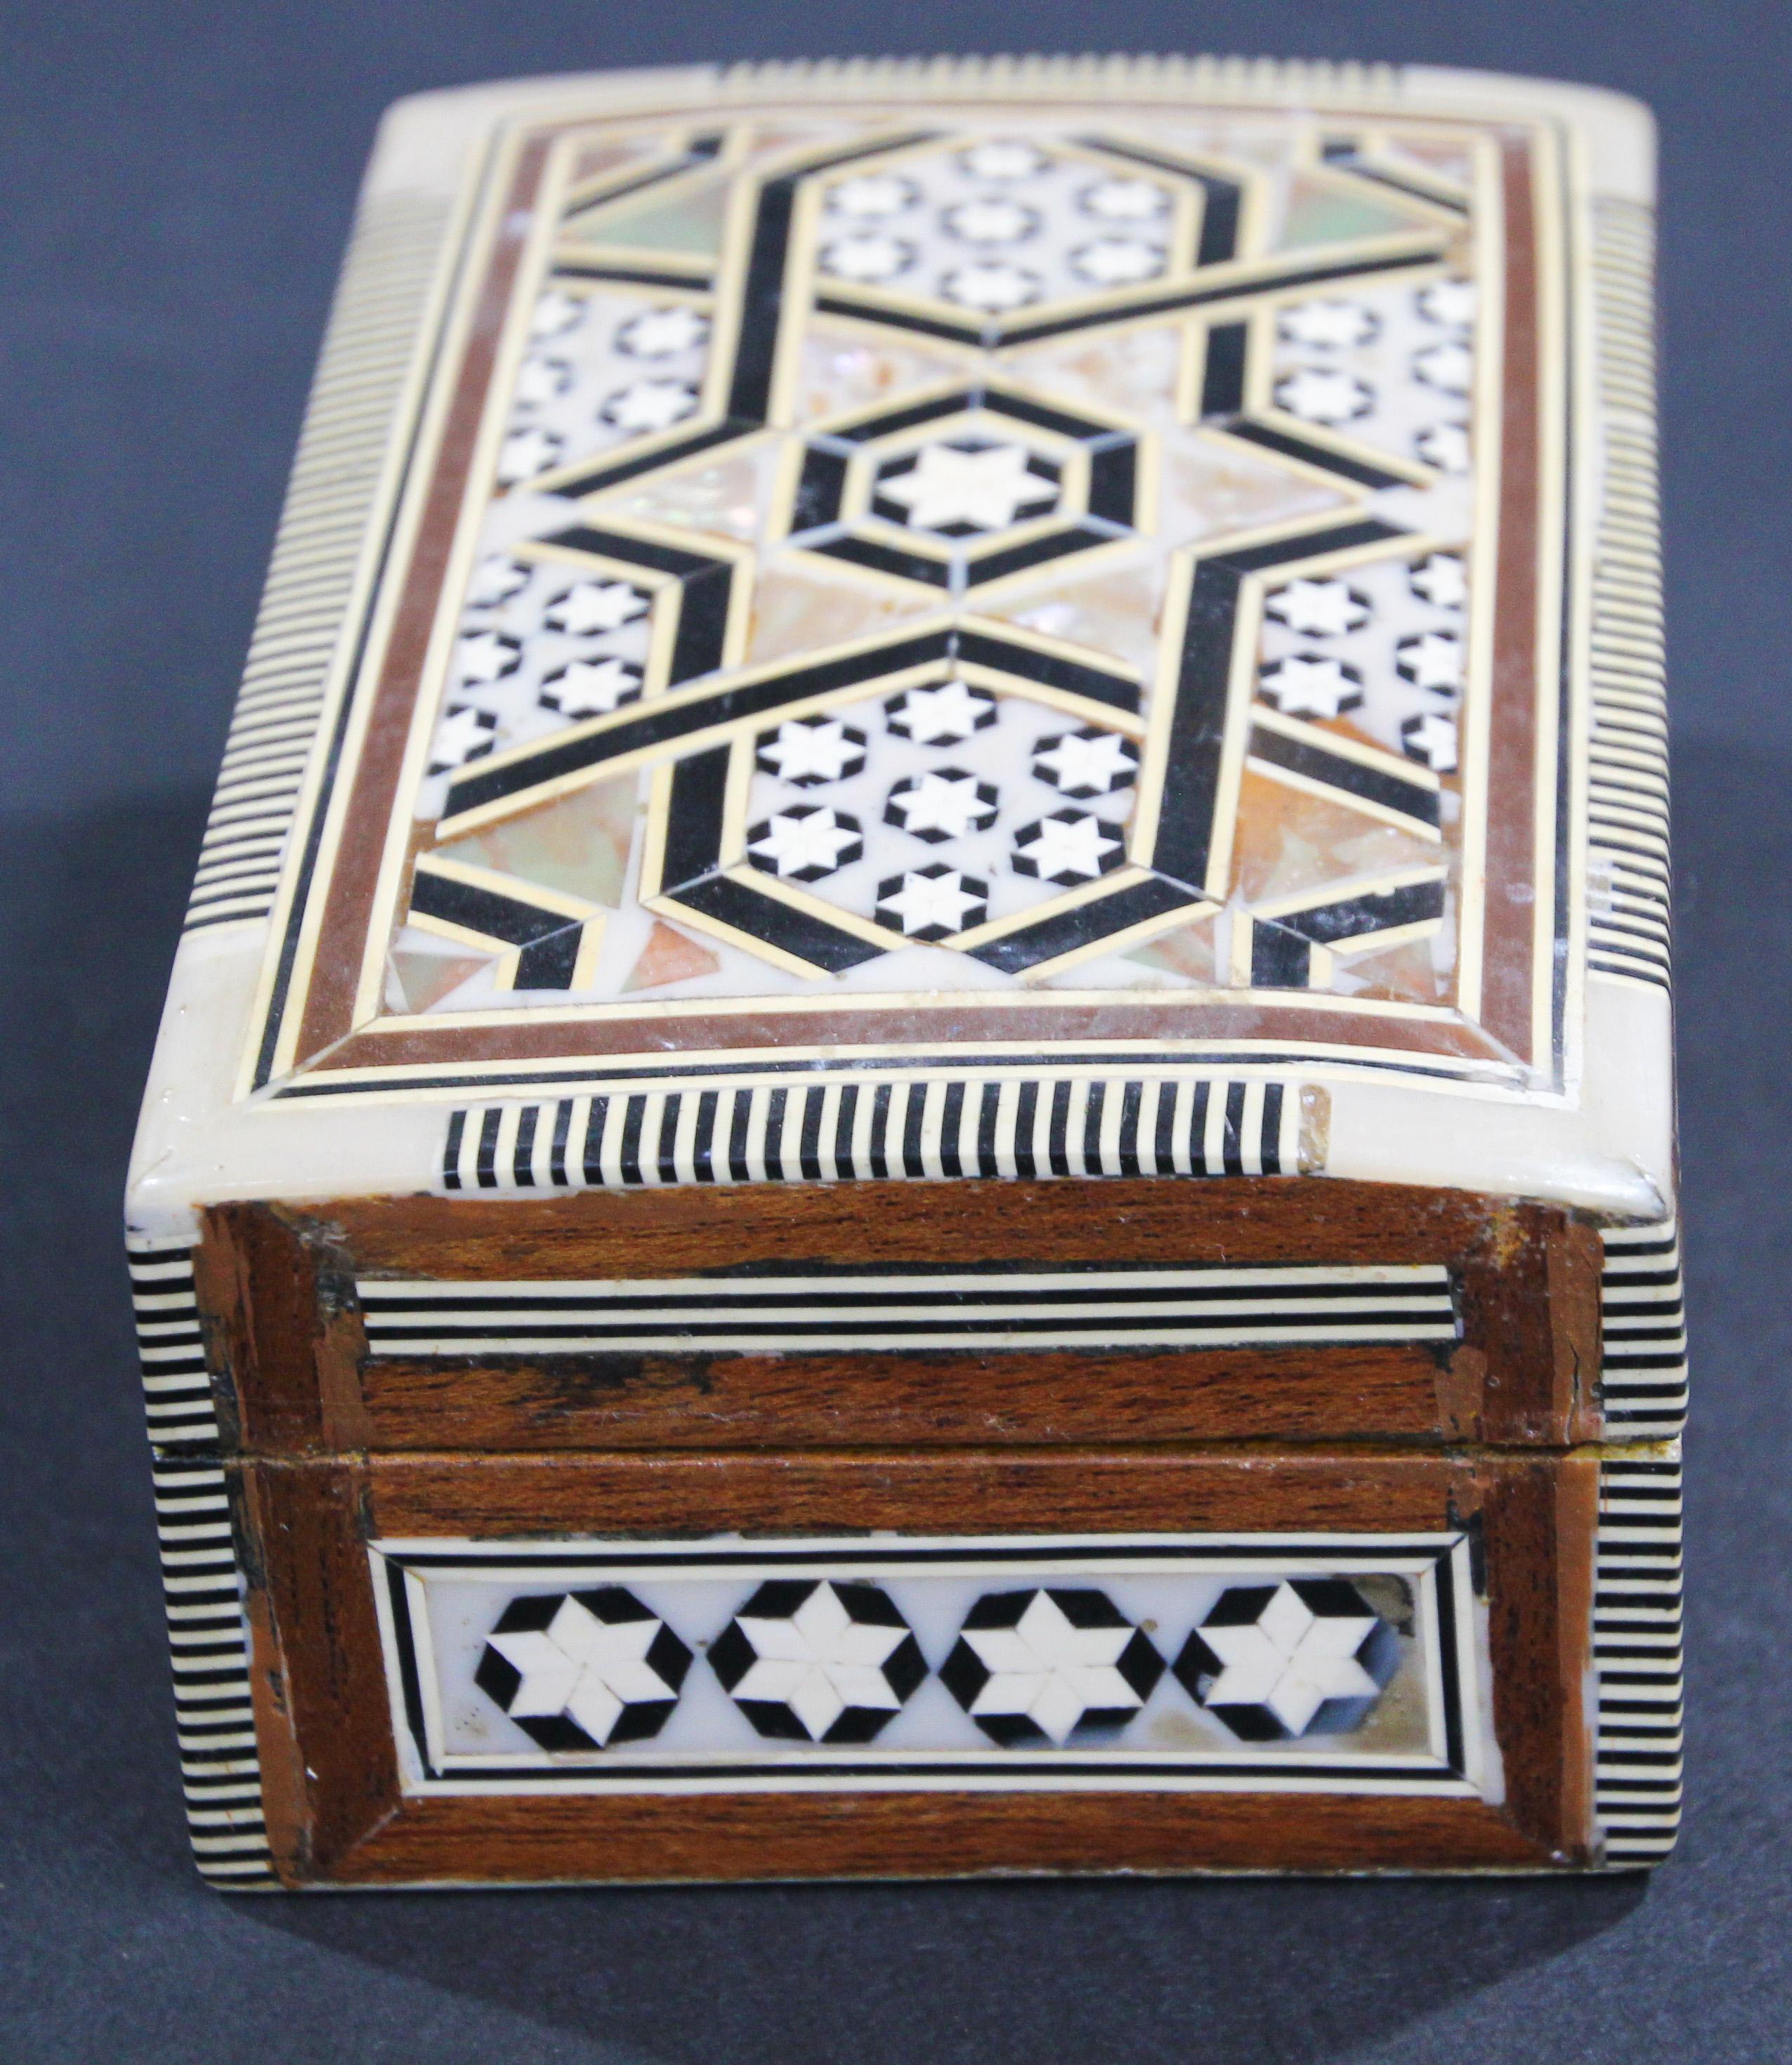 Moorish Middle Eastern Handcrafted Mosaic Decorative Box For Sale 1